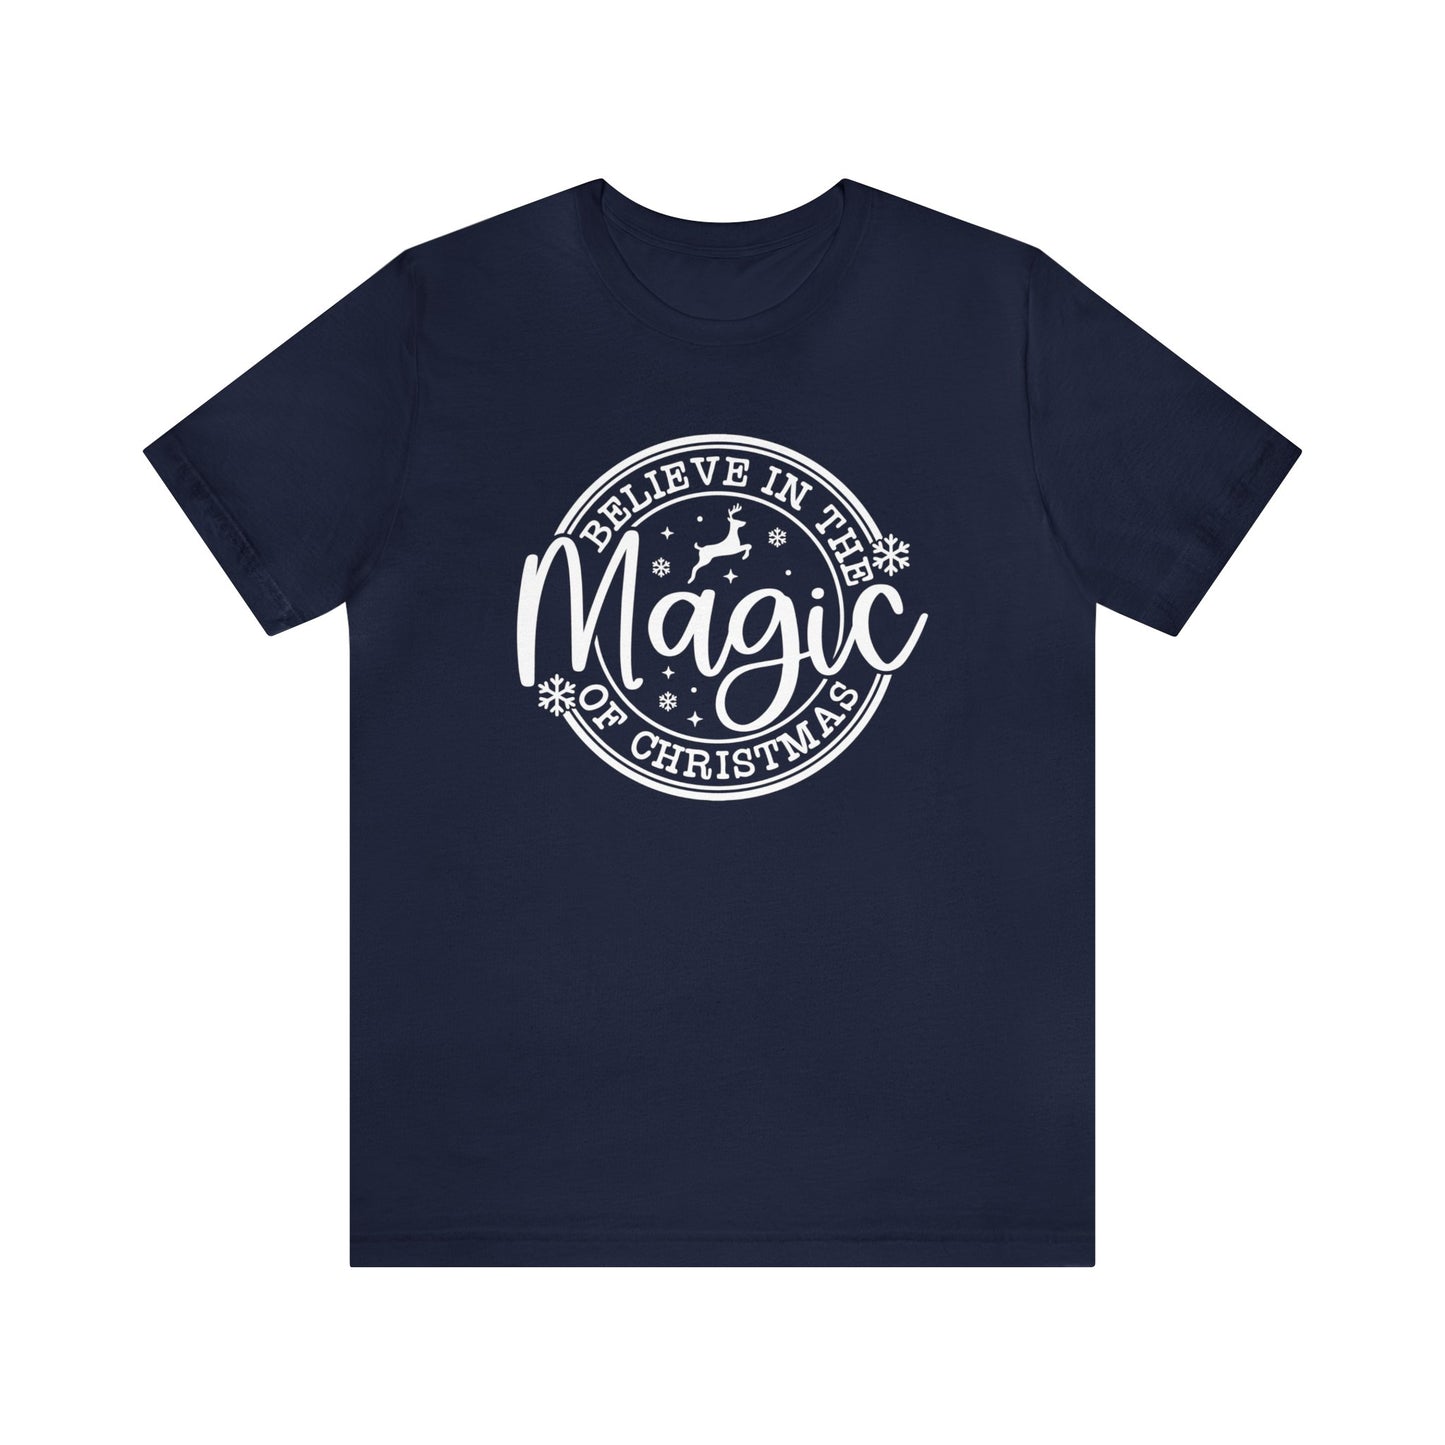 Believe in the Magic of Christmas Shirt Short Sleeve Tee